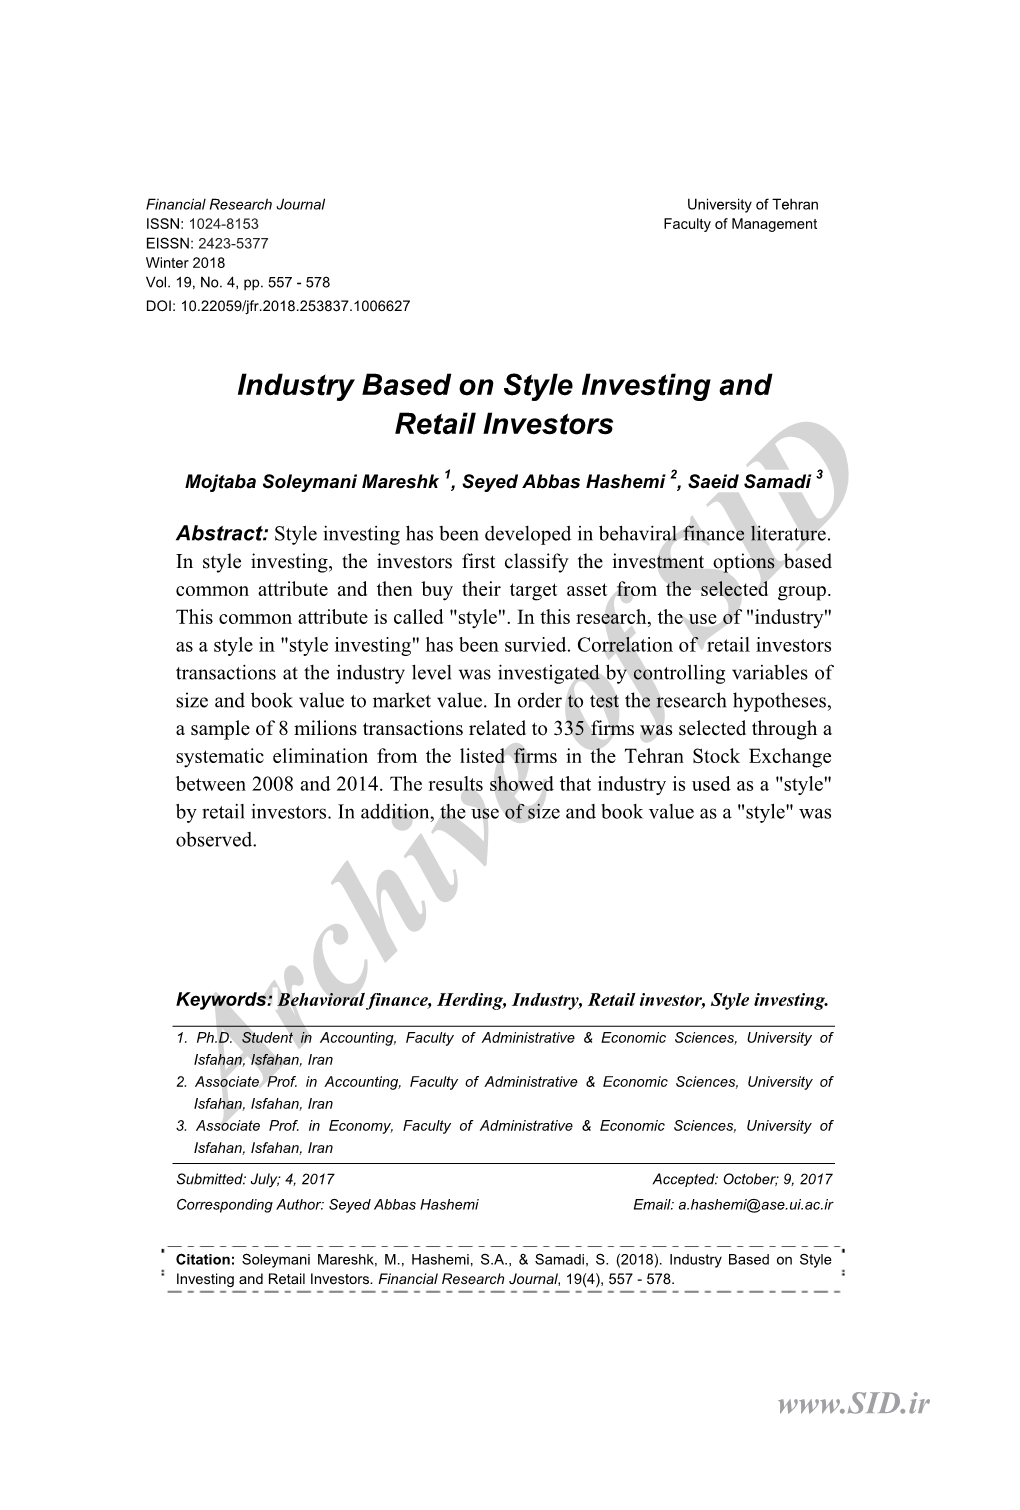 Industry Based on Style Investing and Retail Investors